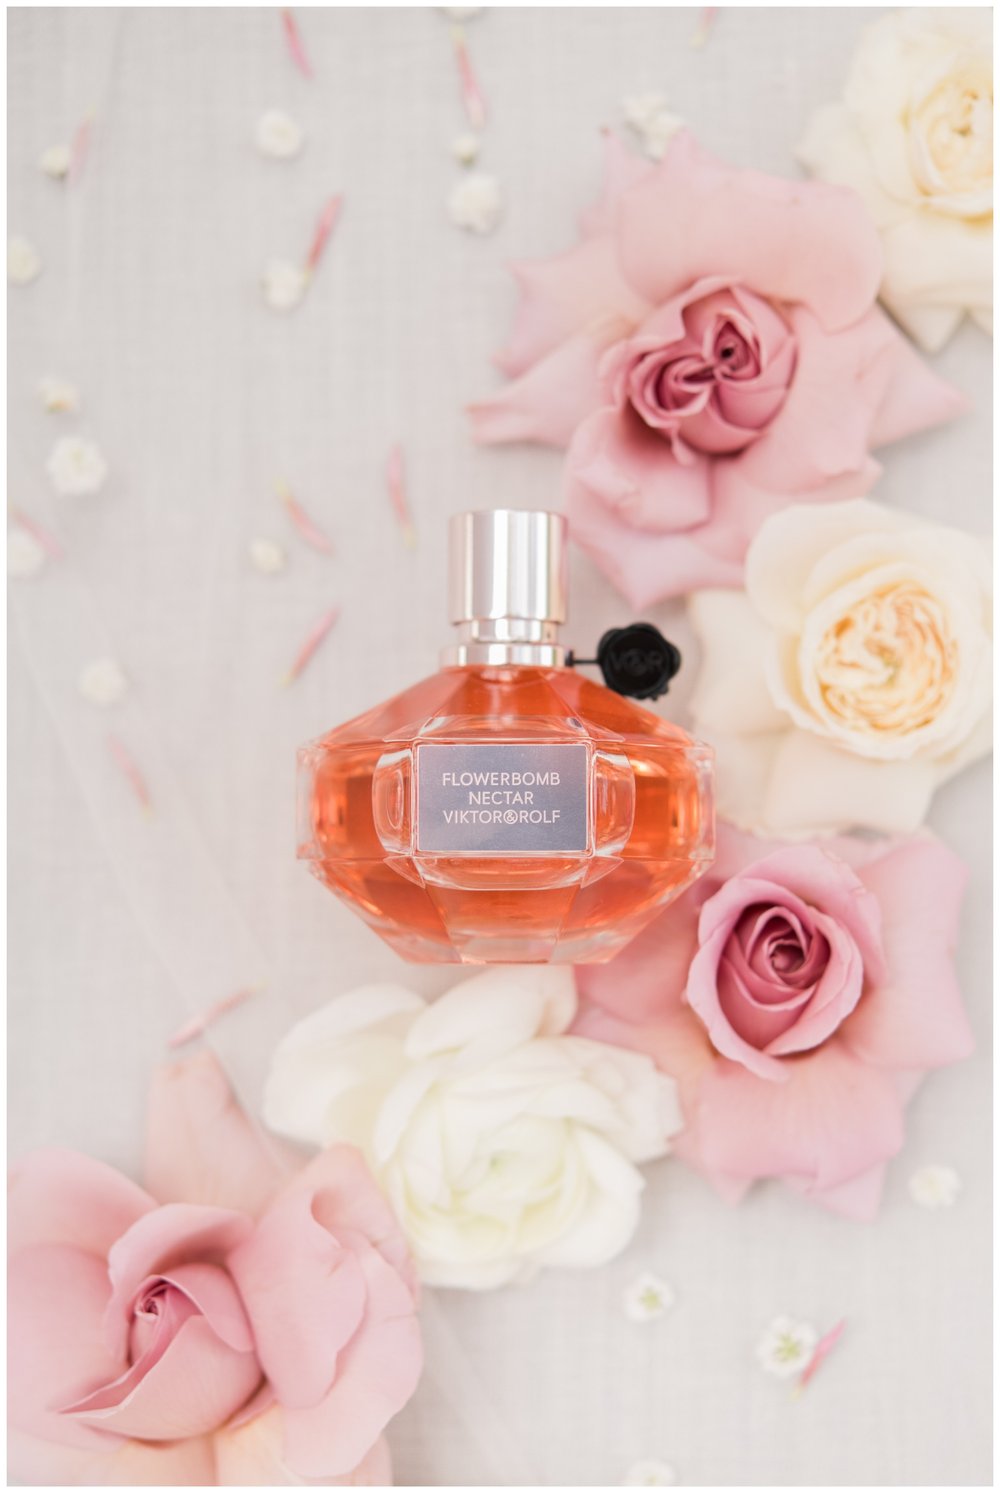 perfume bottle surrounded by white and blush florals